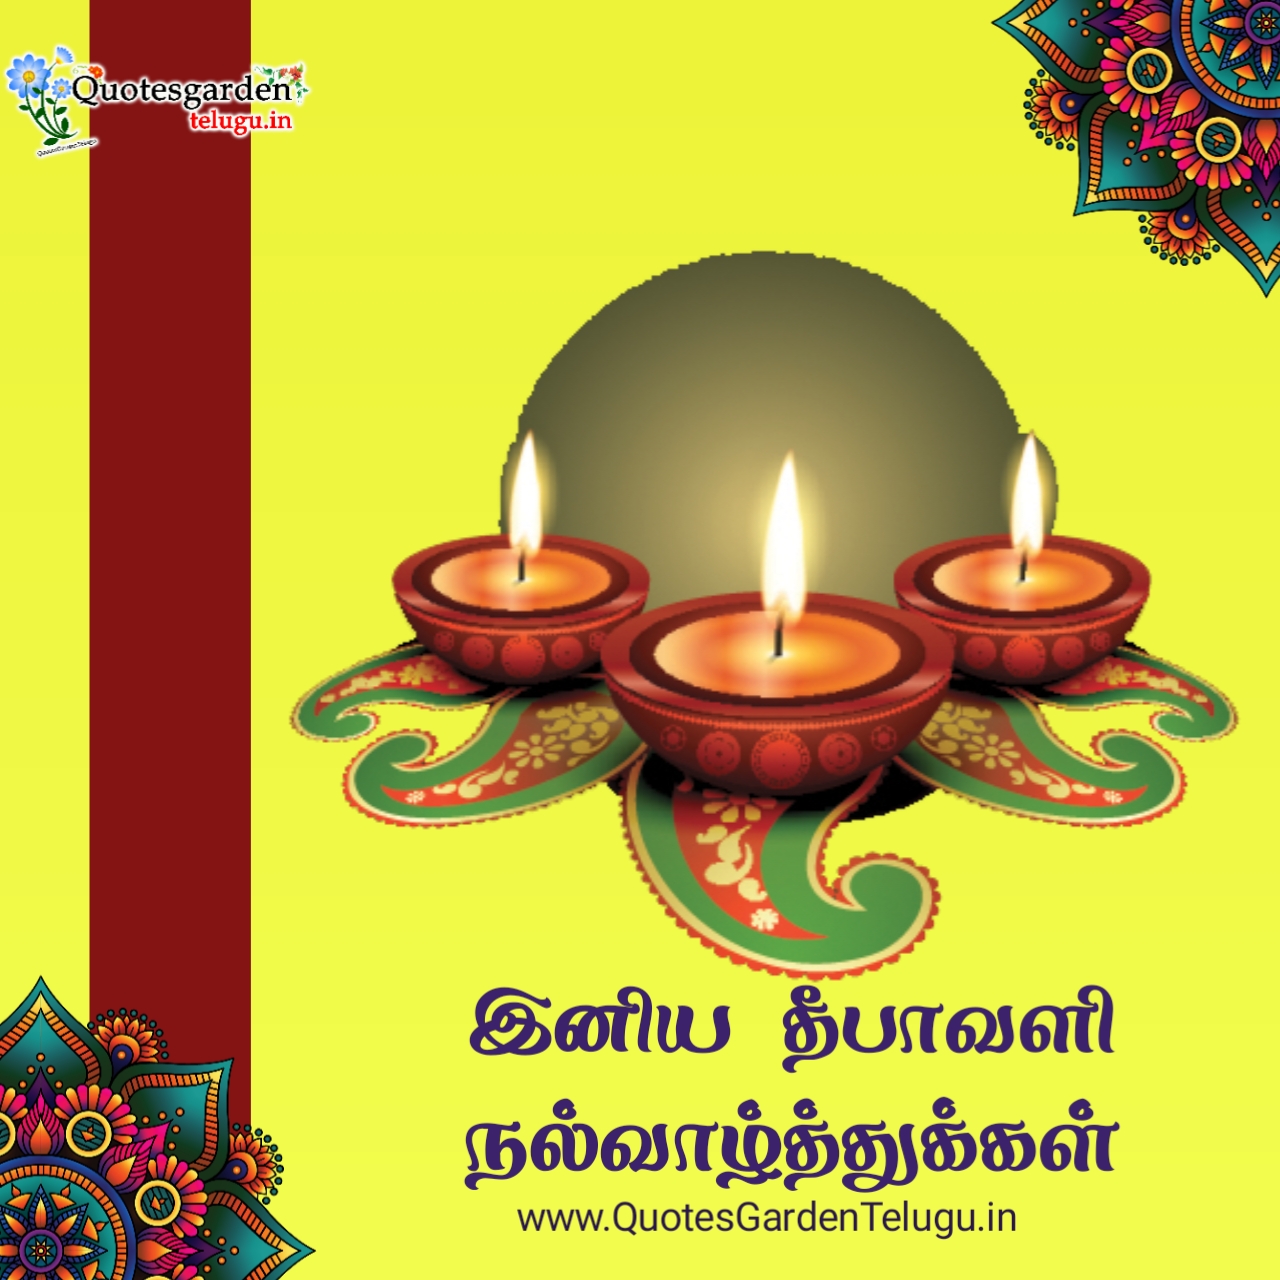 best Diwali 2020 wishes quotes greetings kavithai in tamil | QUOTES ...